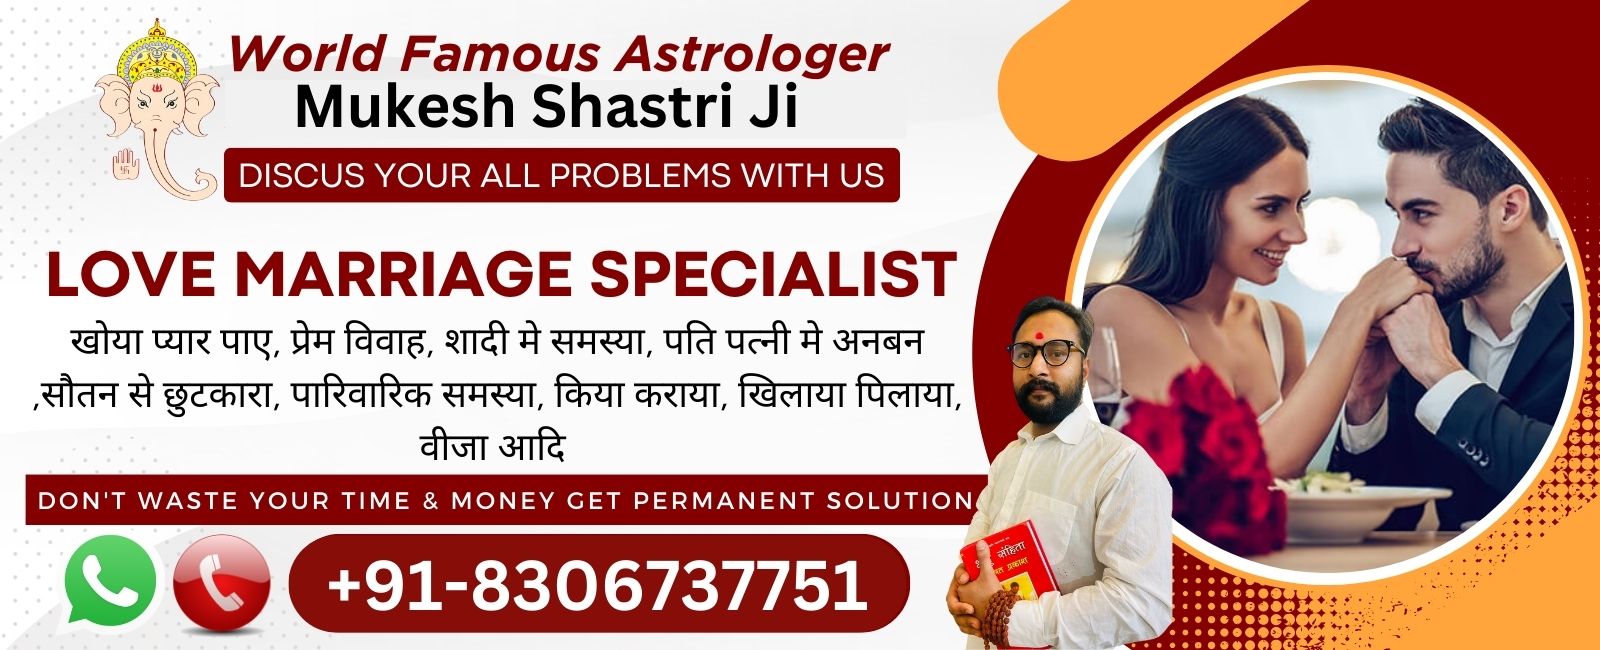 You are currently viewing Female Astrologer for Free Consultation | निःशुल्क परामर्श के लिए महिला ज्योतिषी